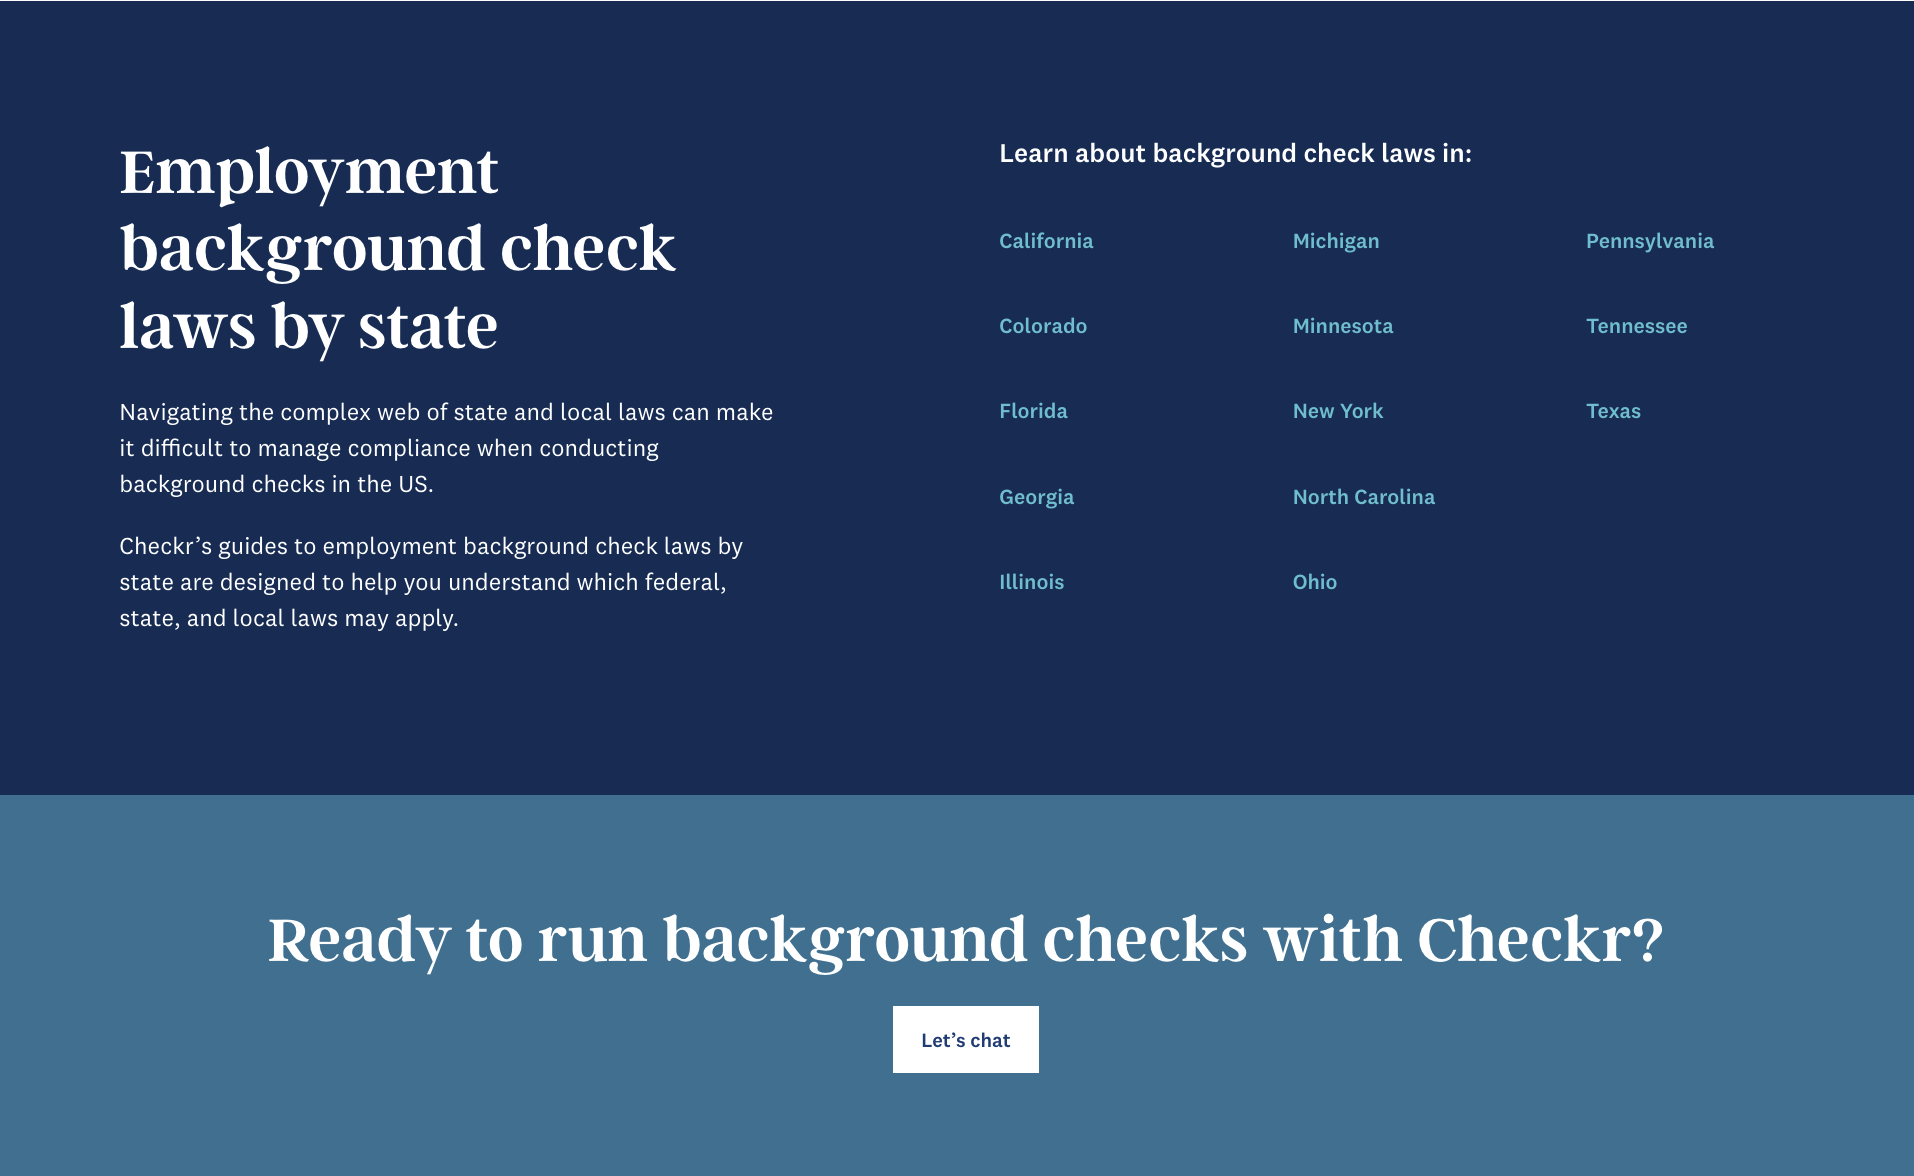 Checkr's background check page location-specific guides